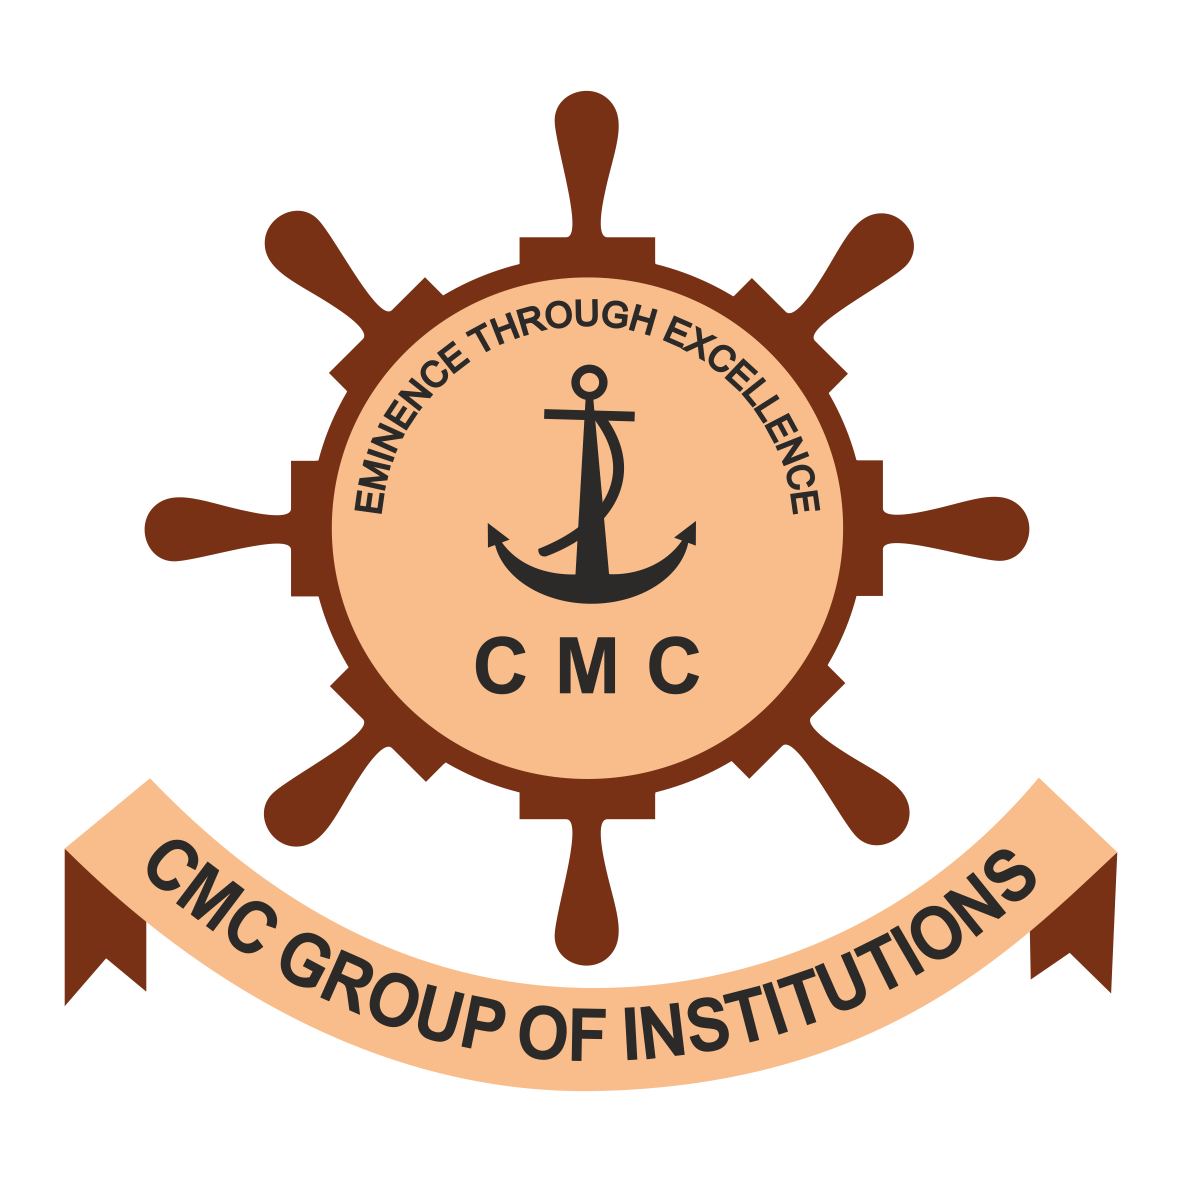 CMC Group of Institutions